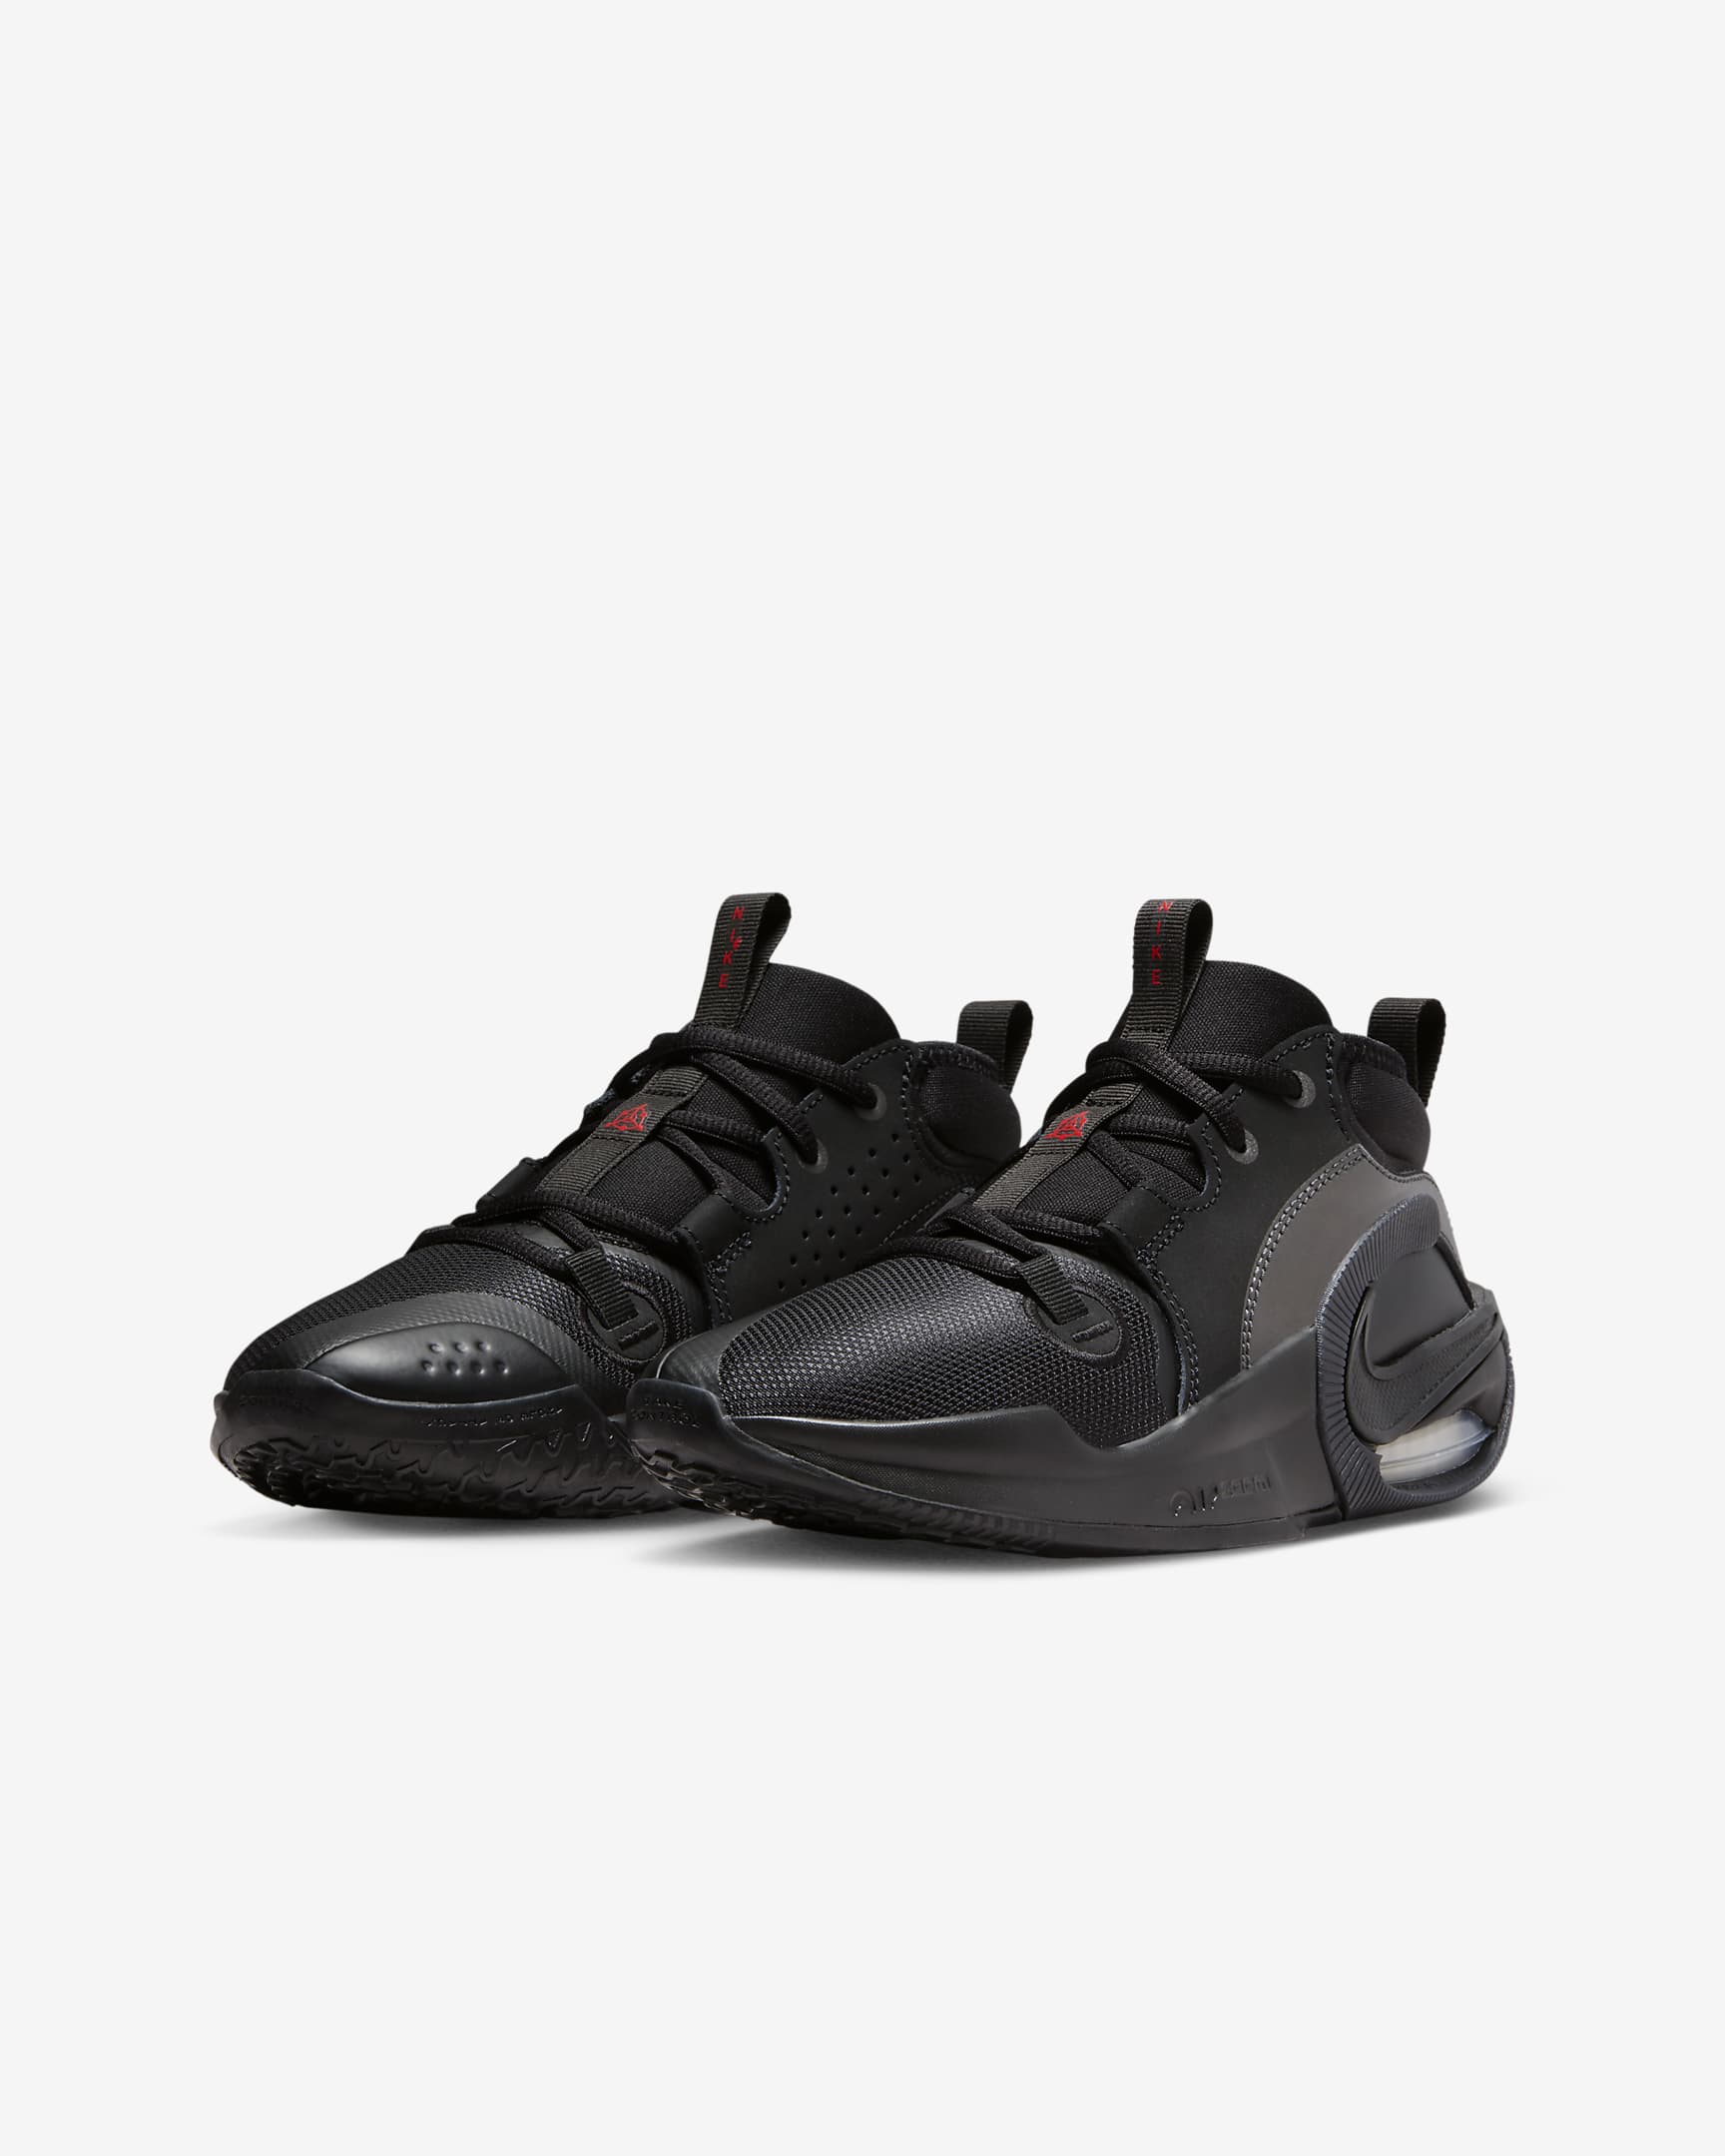 Nike Air Zoom Crossover 2 Older Kids' Basketball Shoes - Black/Bright Crimson/Tint/Anthracite